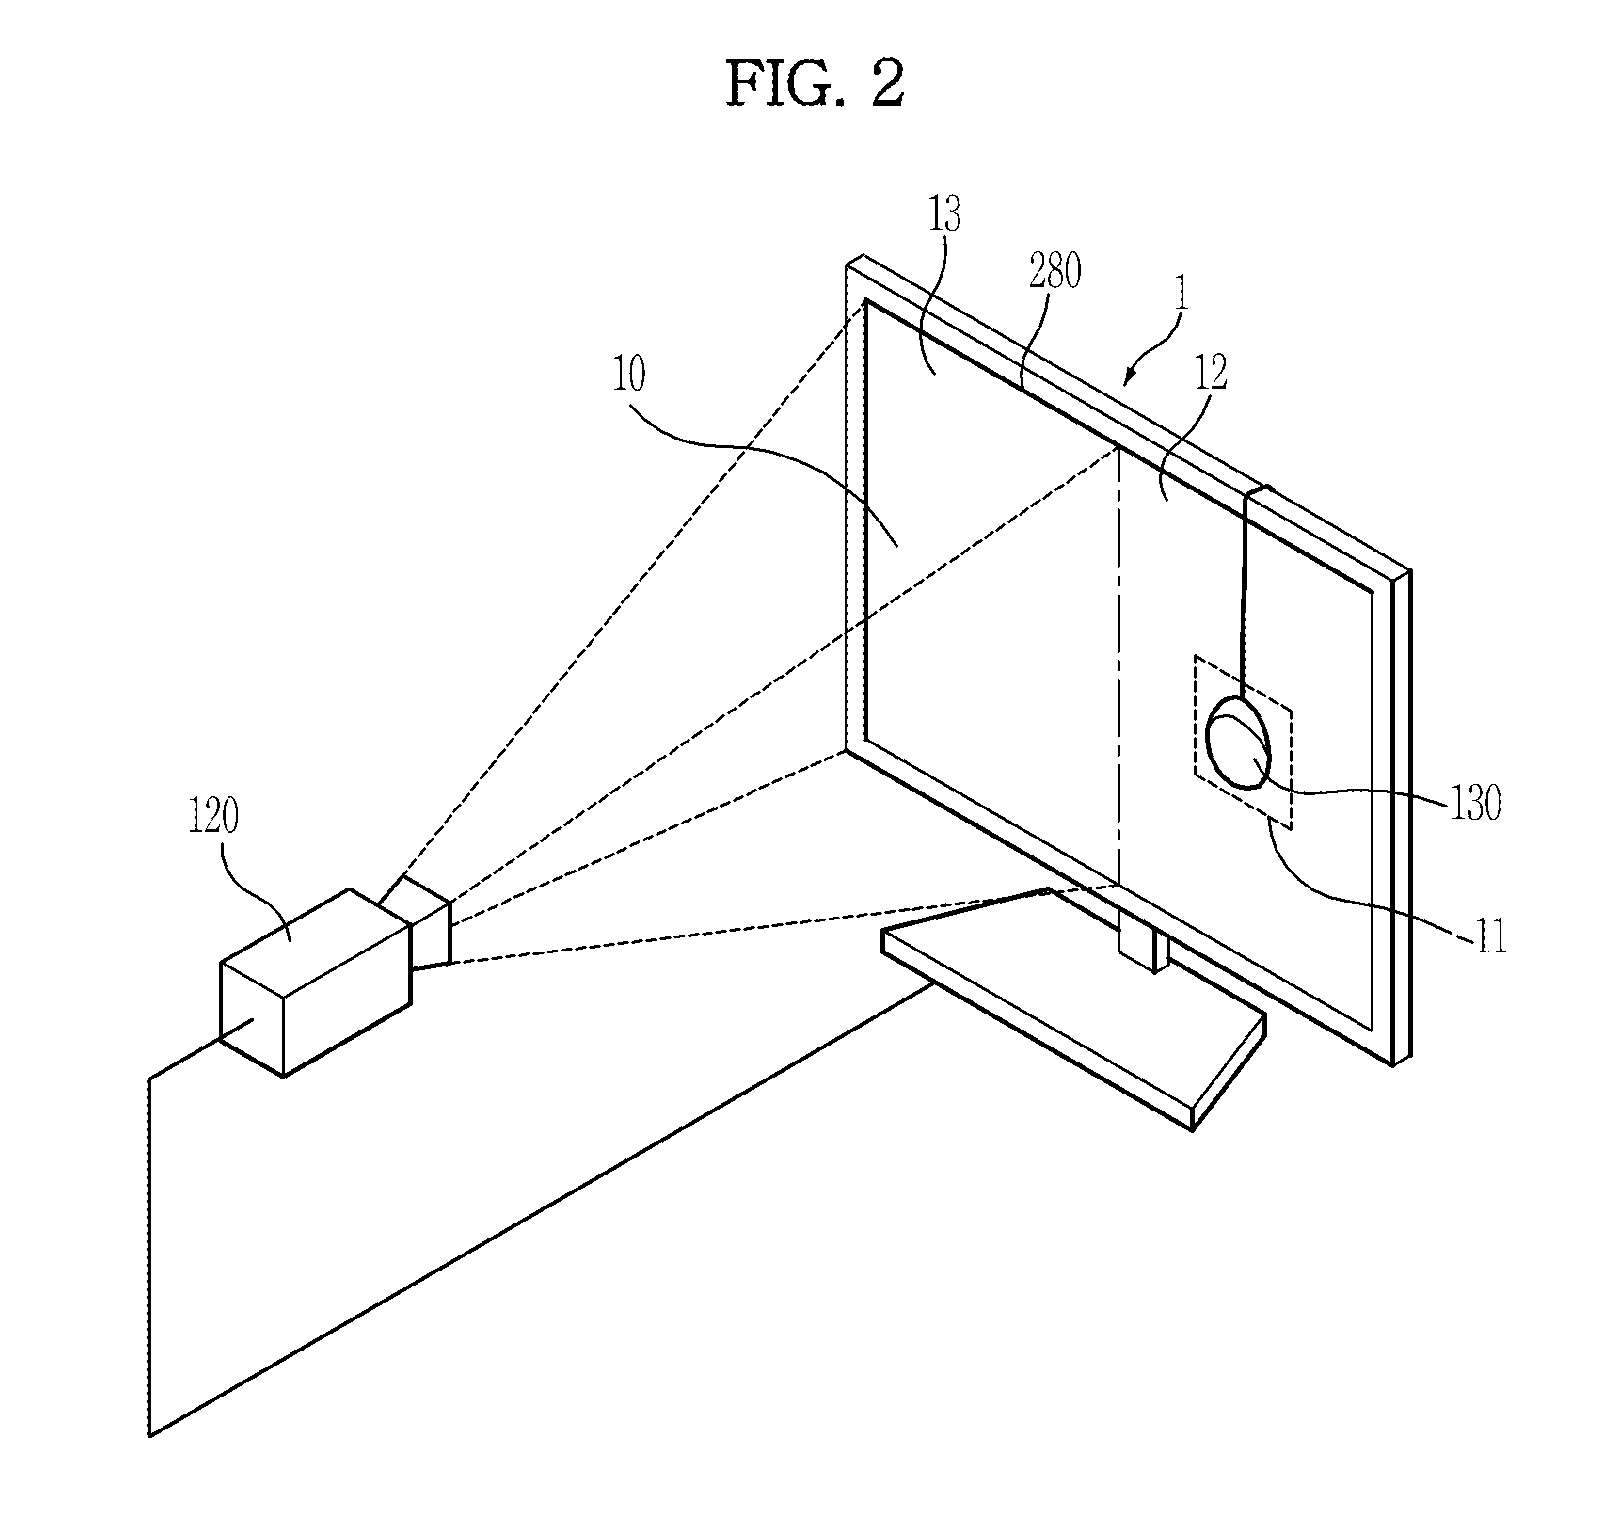 Display device and method of calibrating color